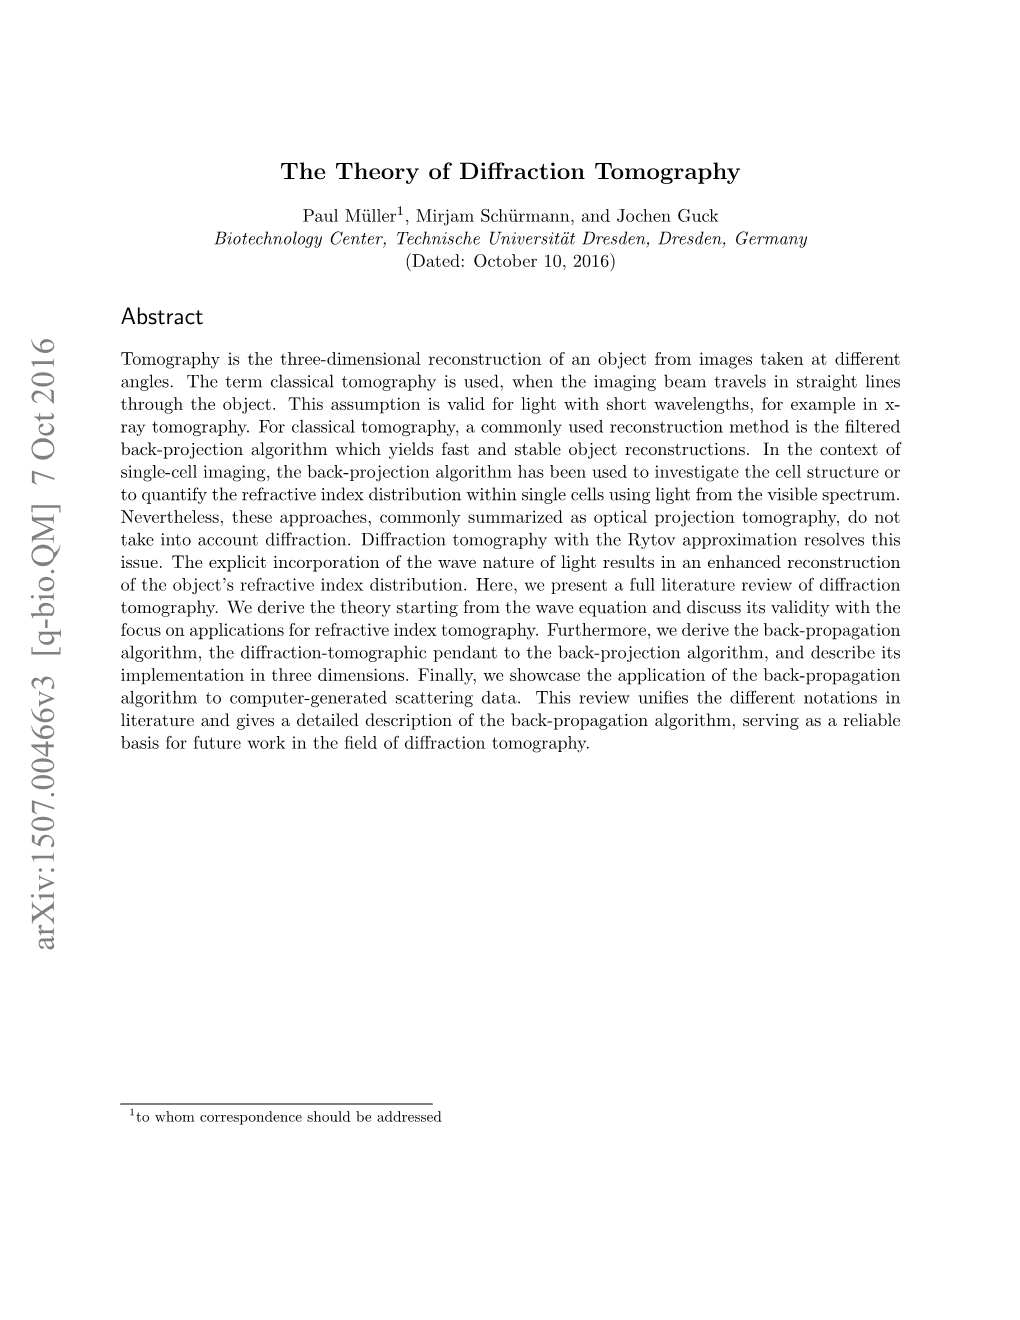 The Theory of Diffraction Tomography